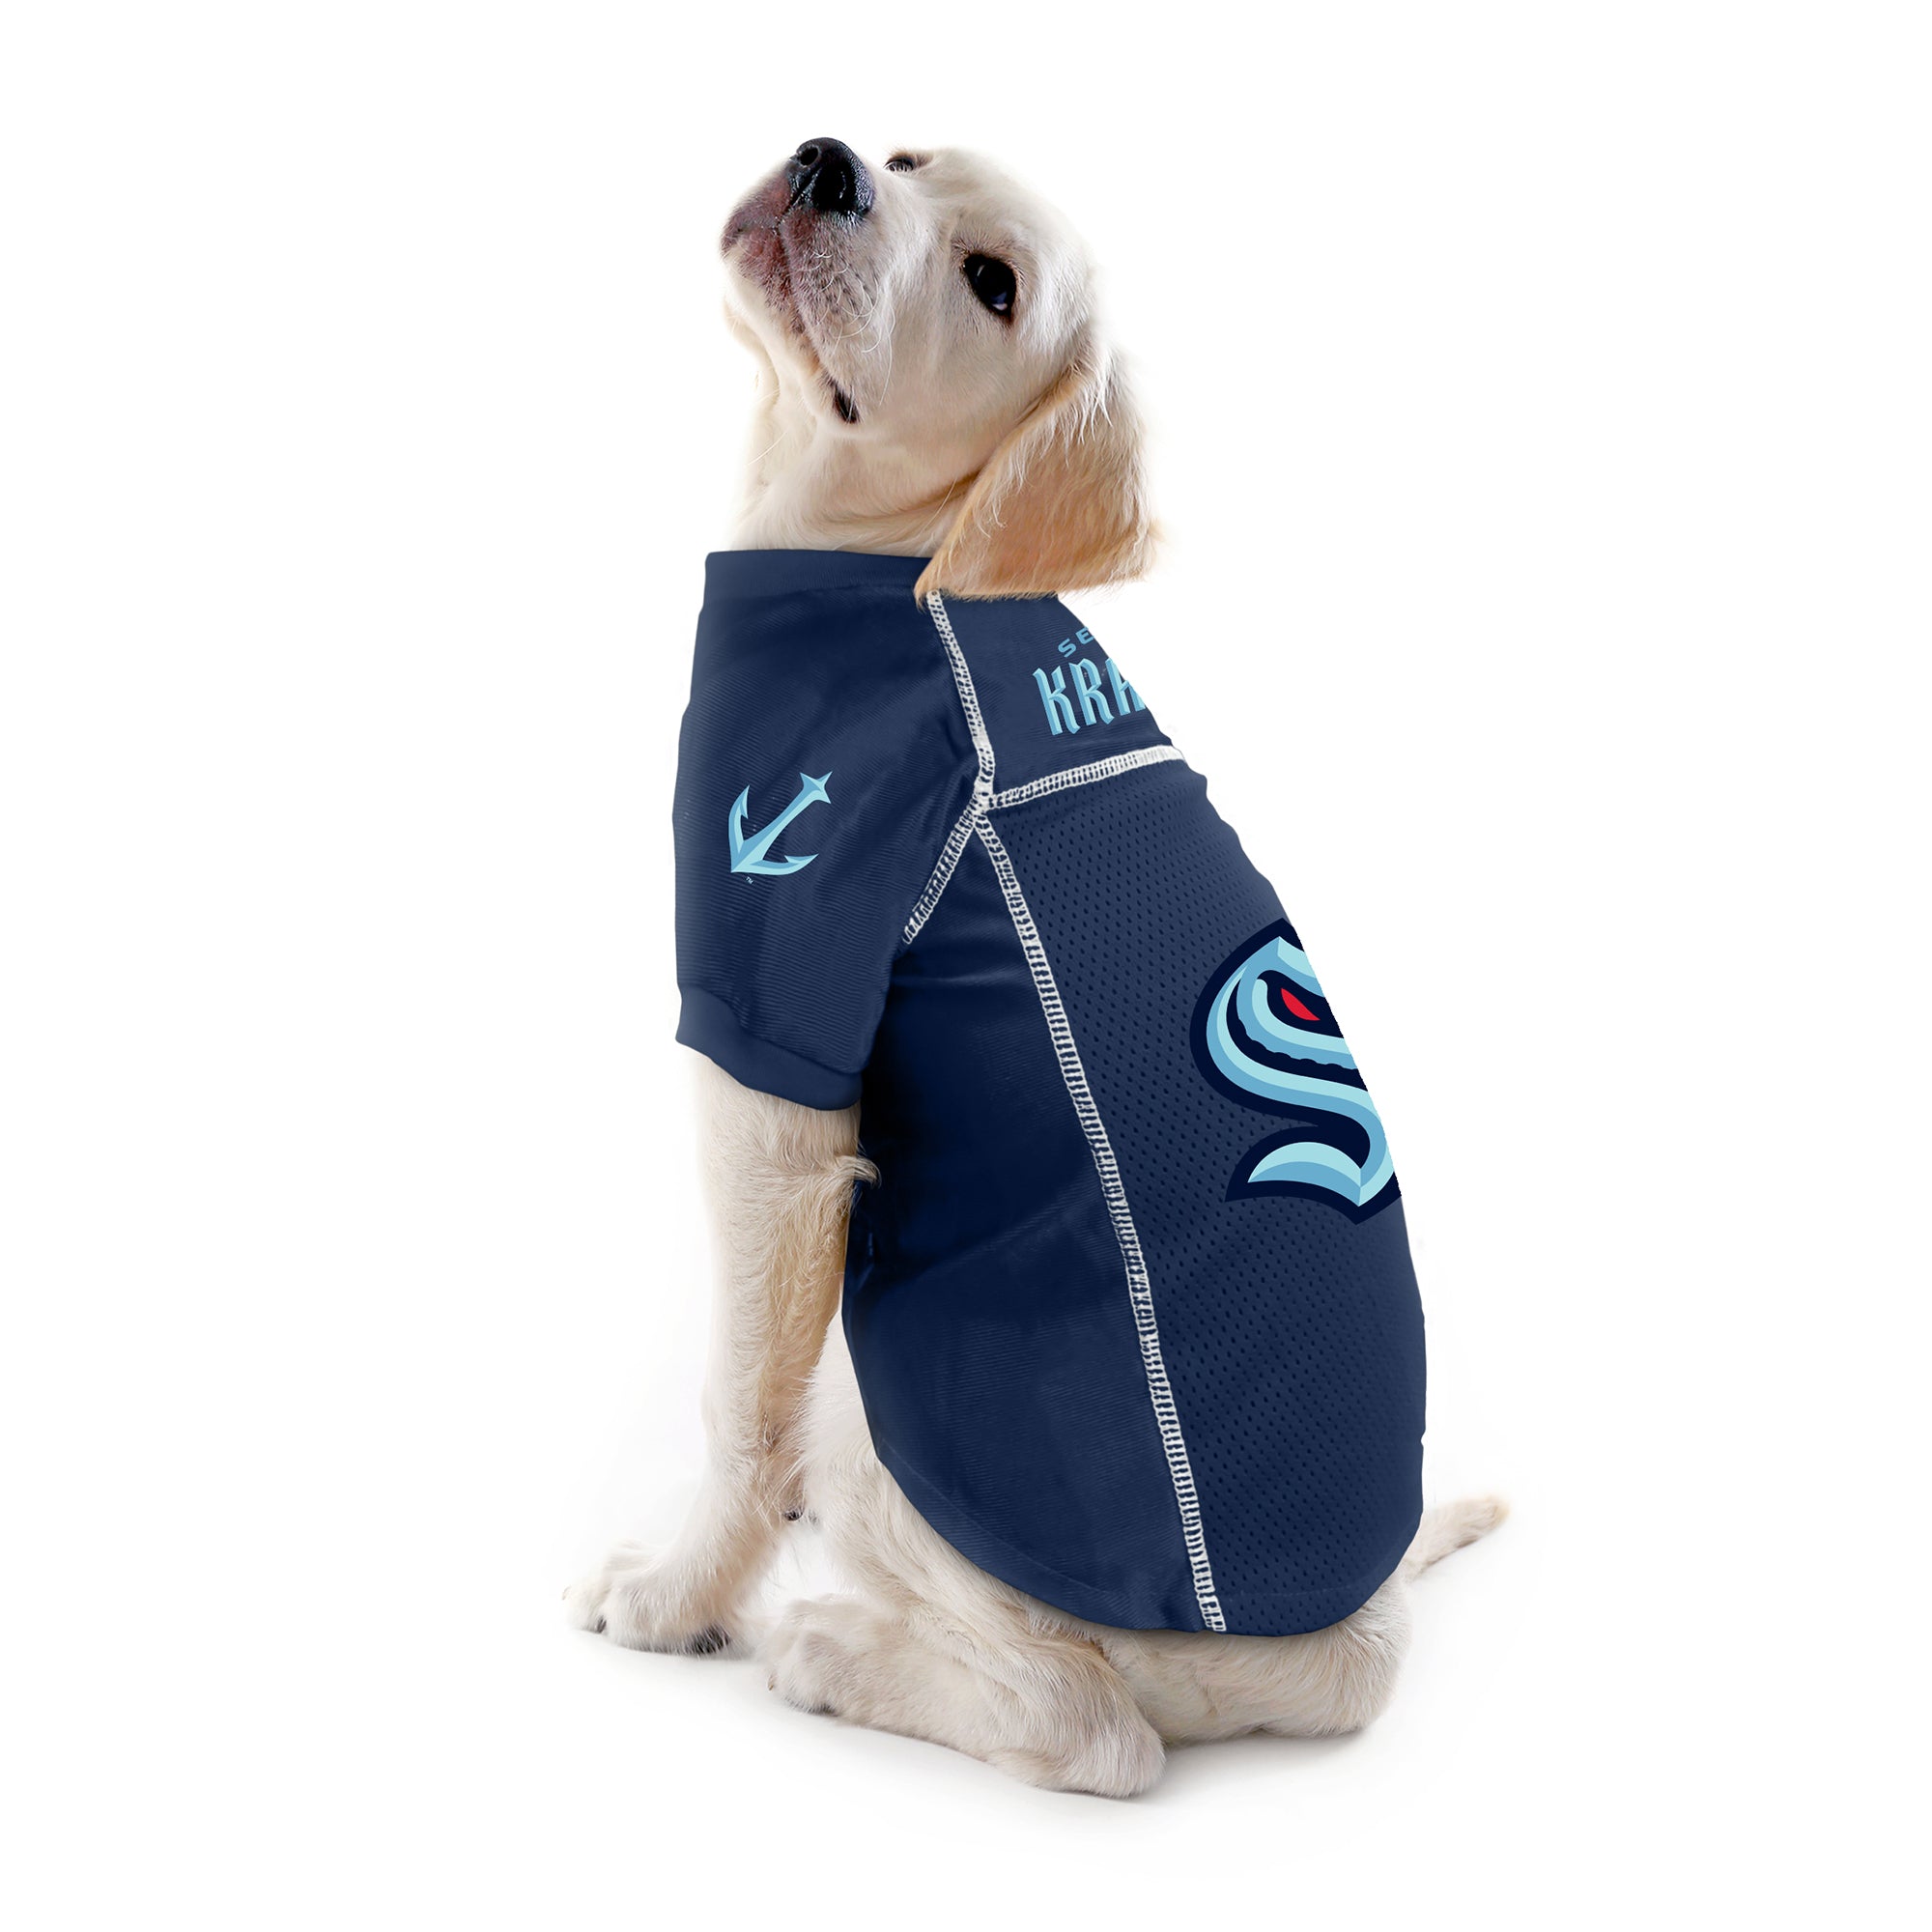  DOG TEE SHIRT - NHL Seattle Kraken PET T-Shirt for Dogs &  Cats, SIZE: X-Small. - Wrinkle-free, Soft & Comfortable, Durable & Washable  wam shirt dress outfit for your cute